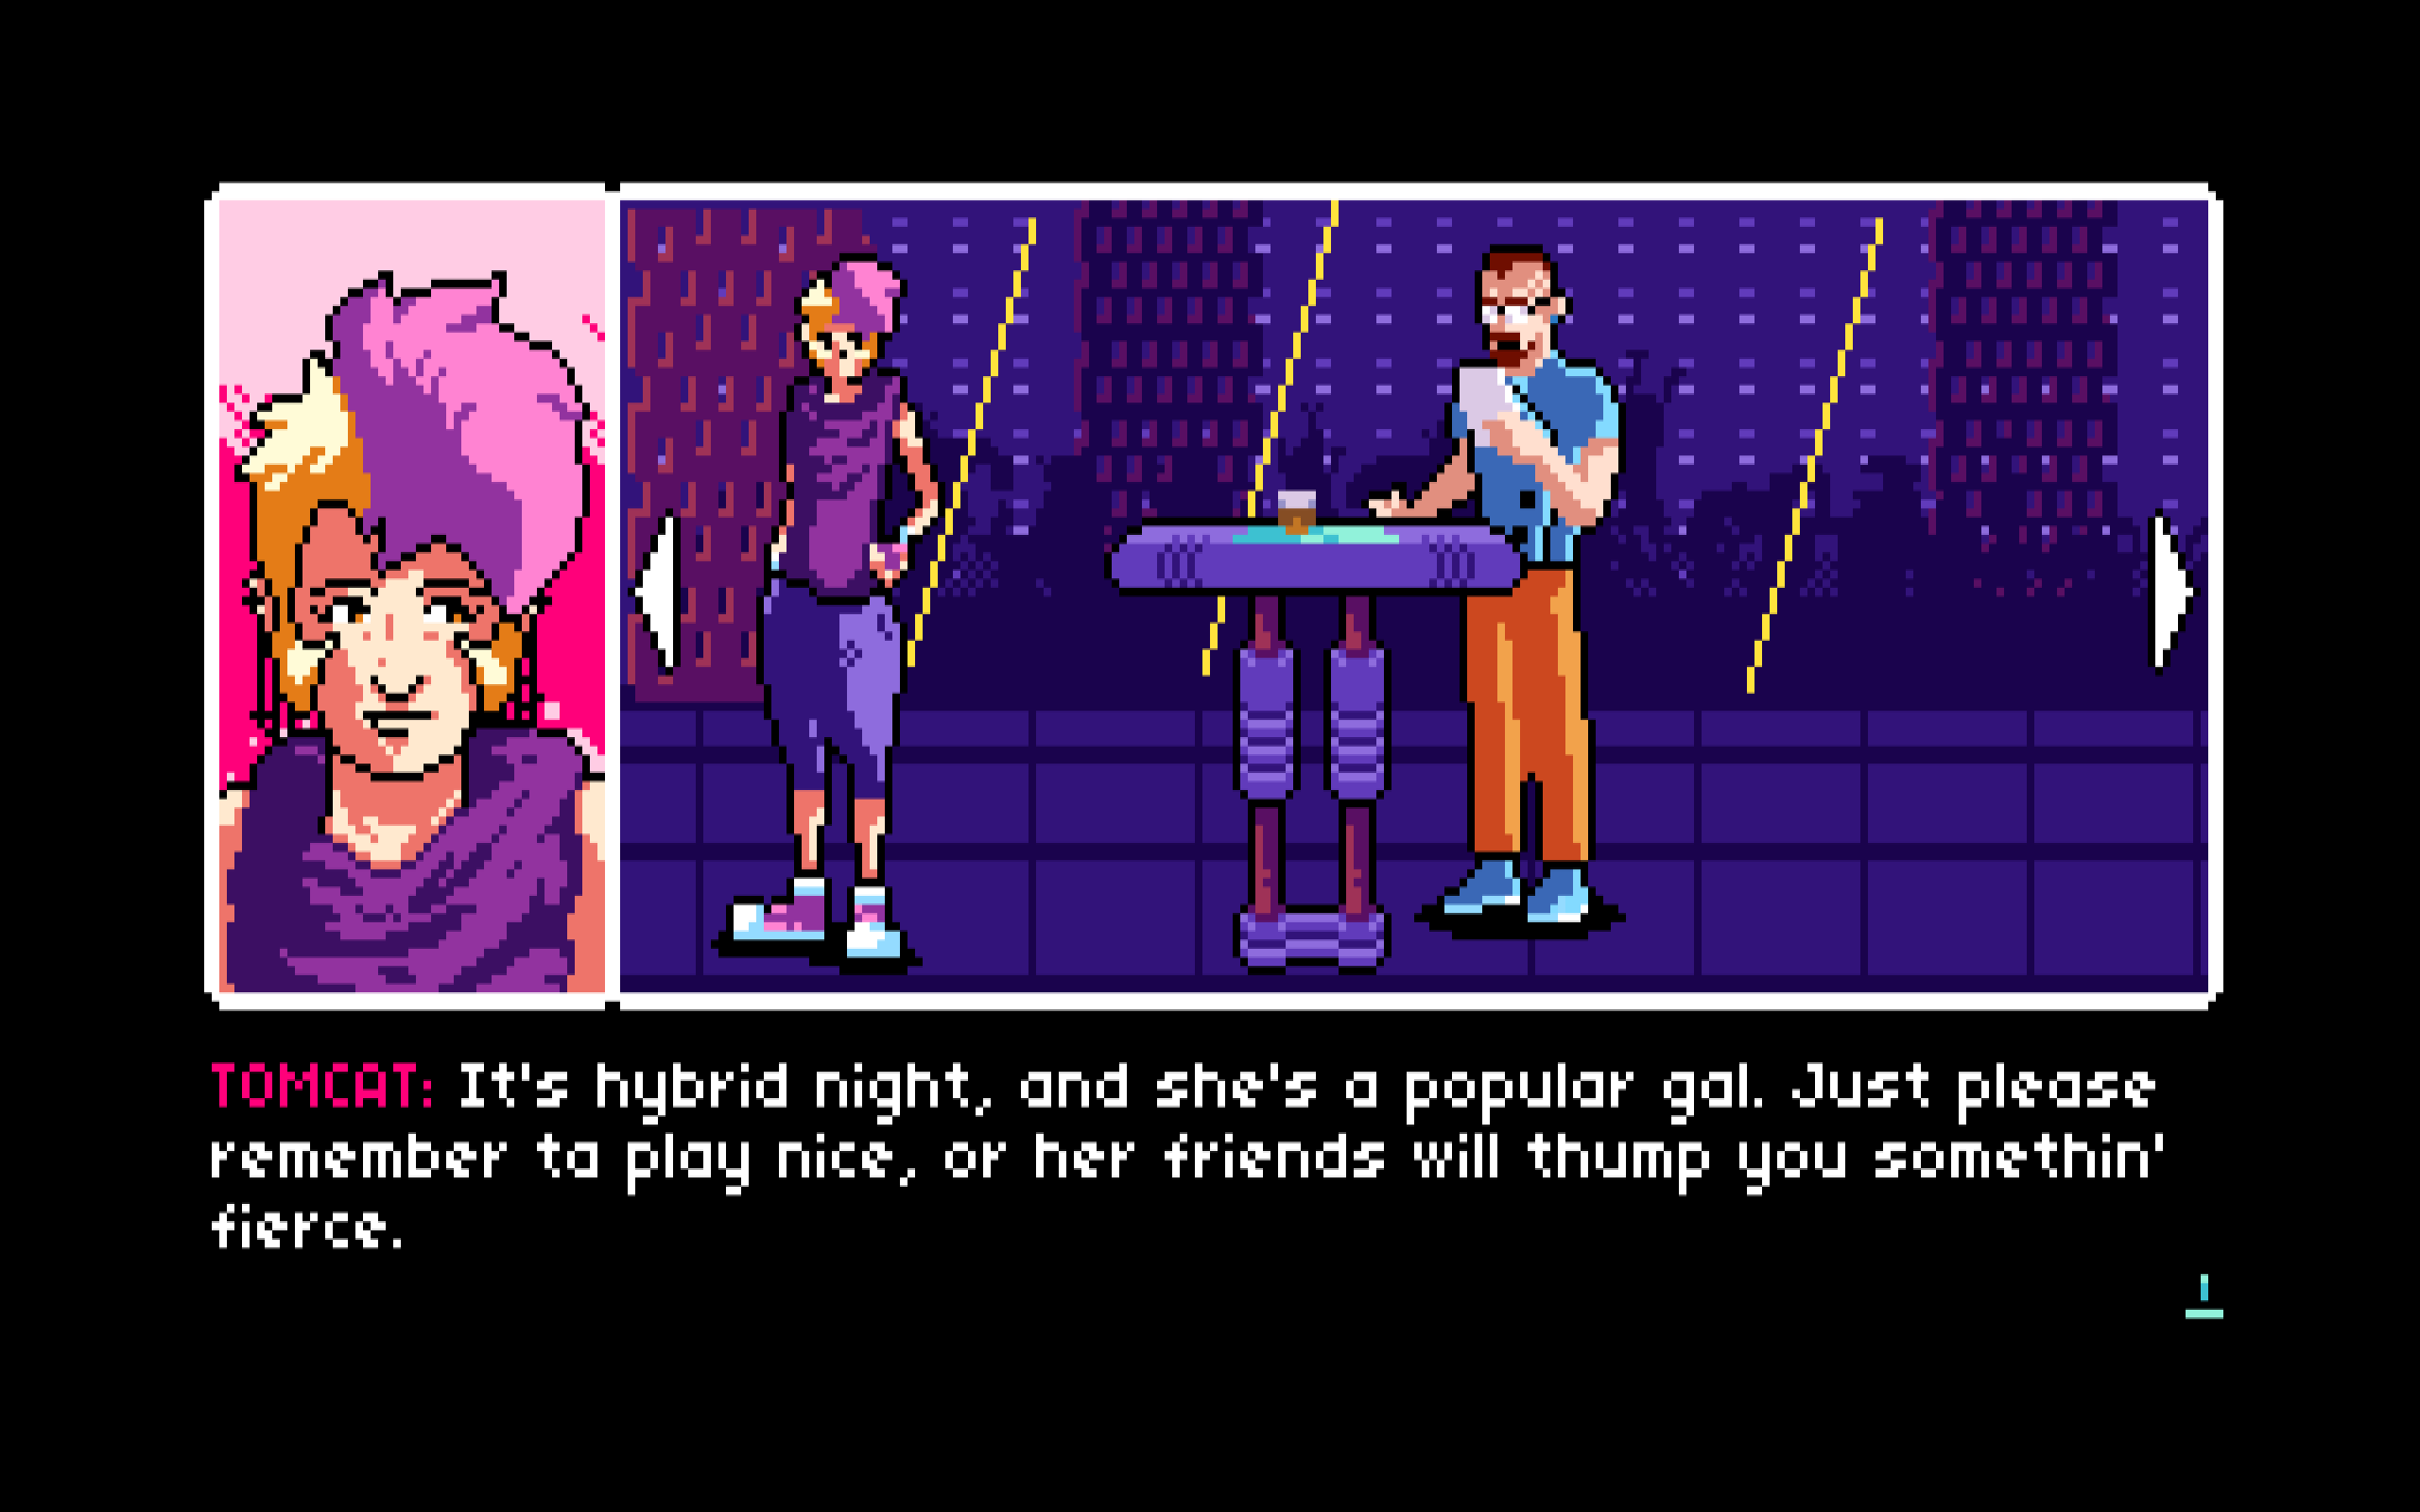 Read Only Memories #1